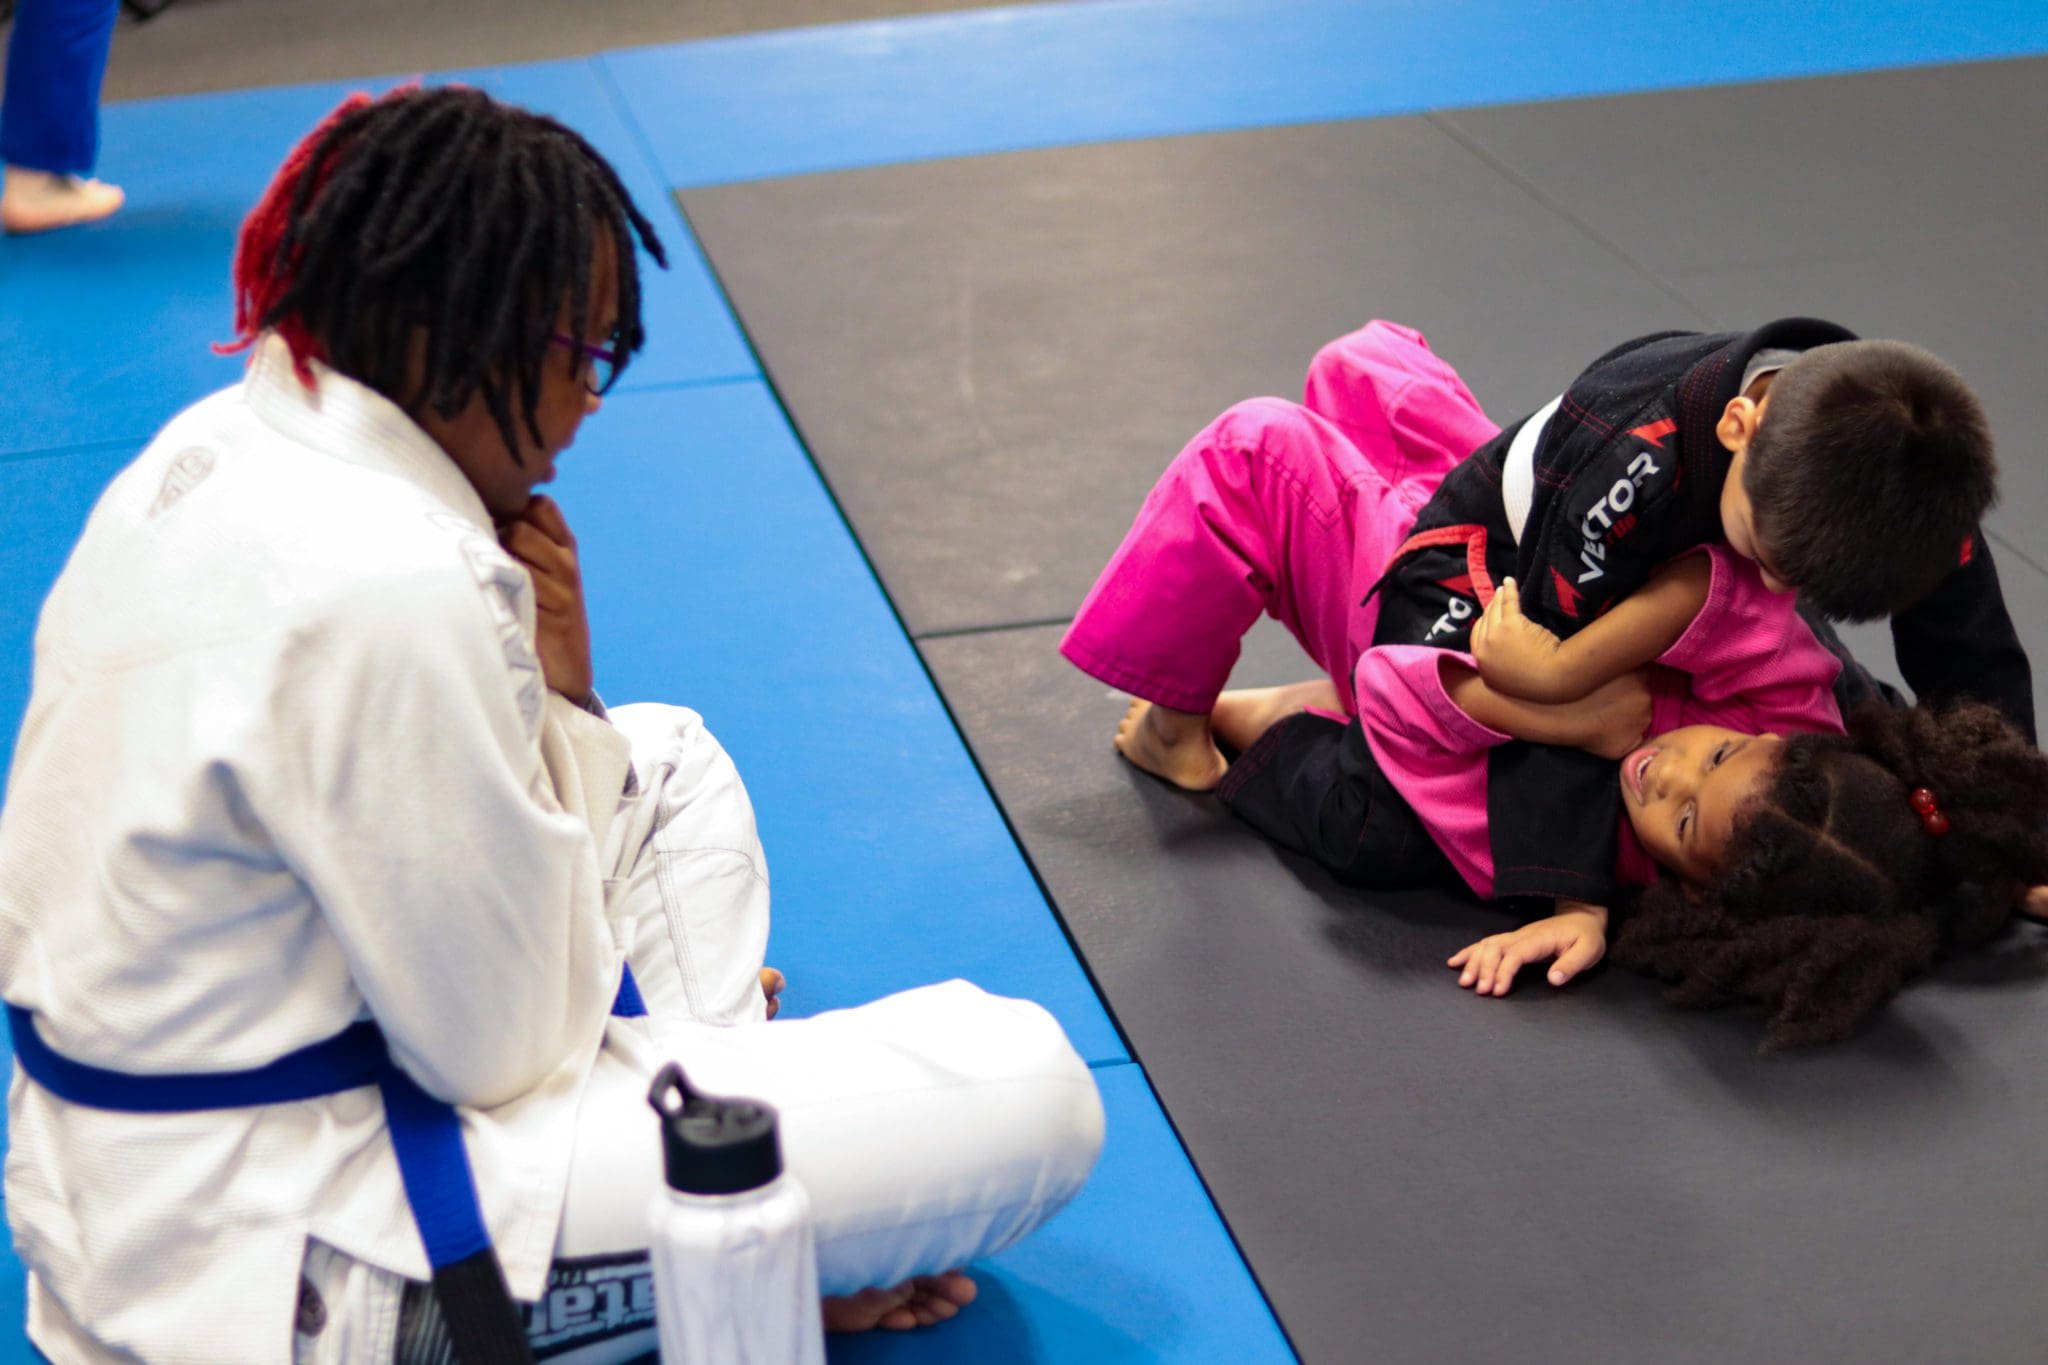 Jen helping out with the kids BJJ class.